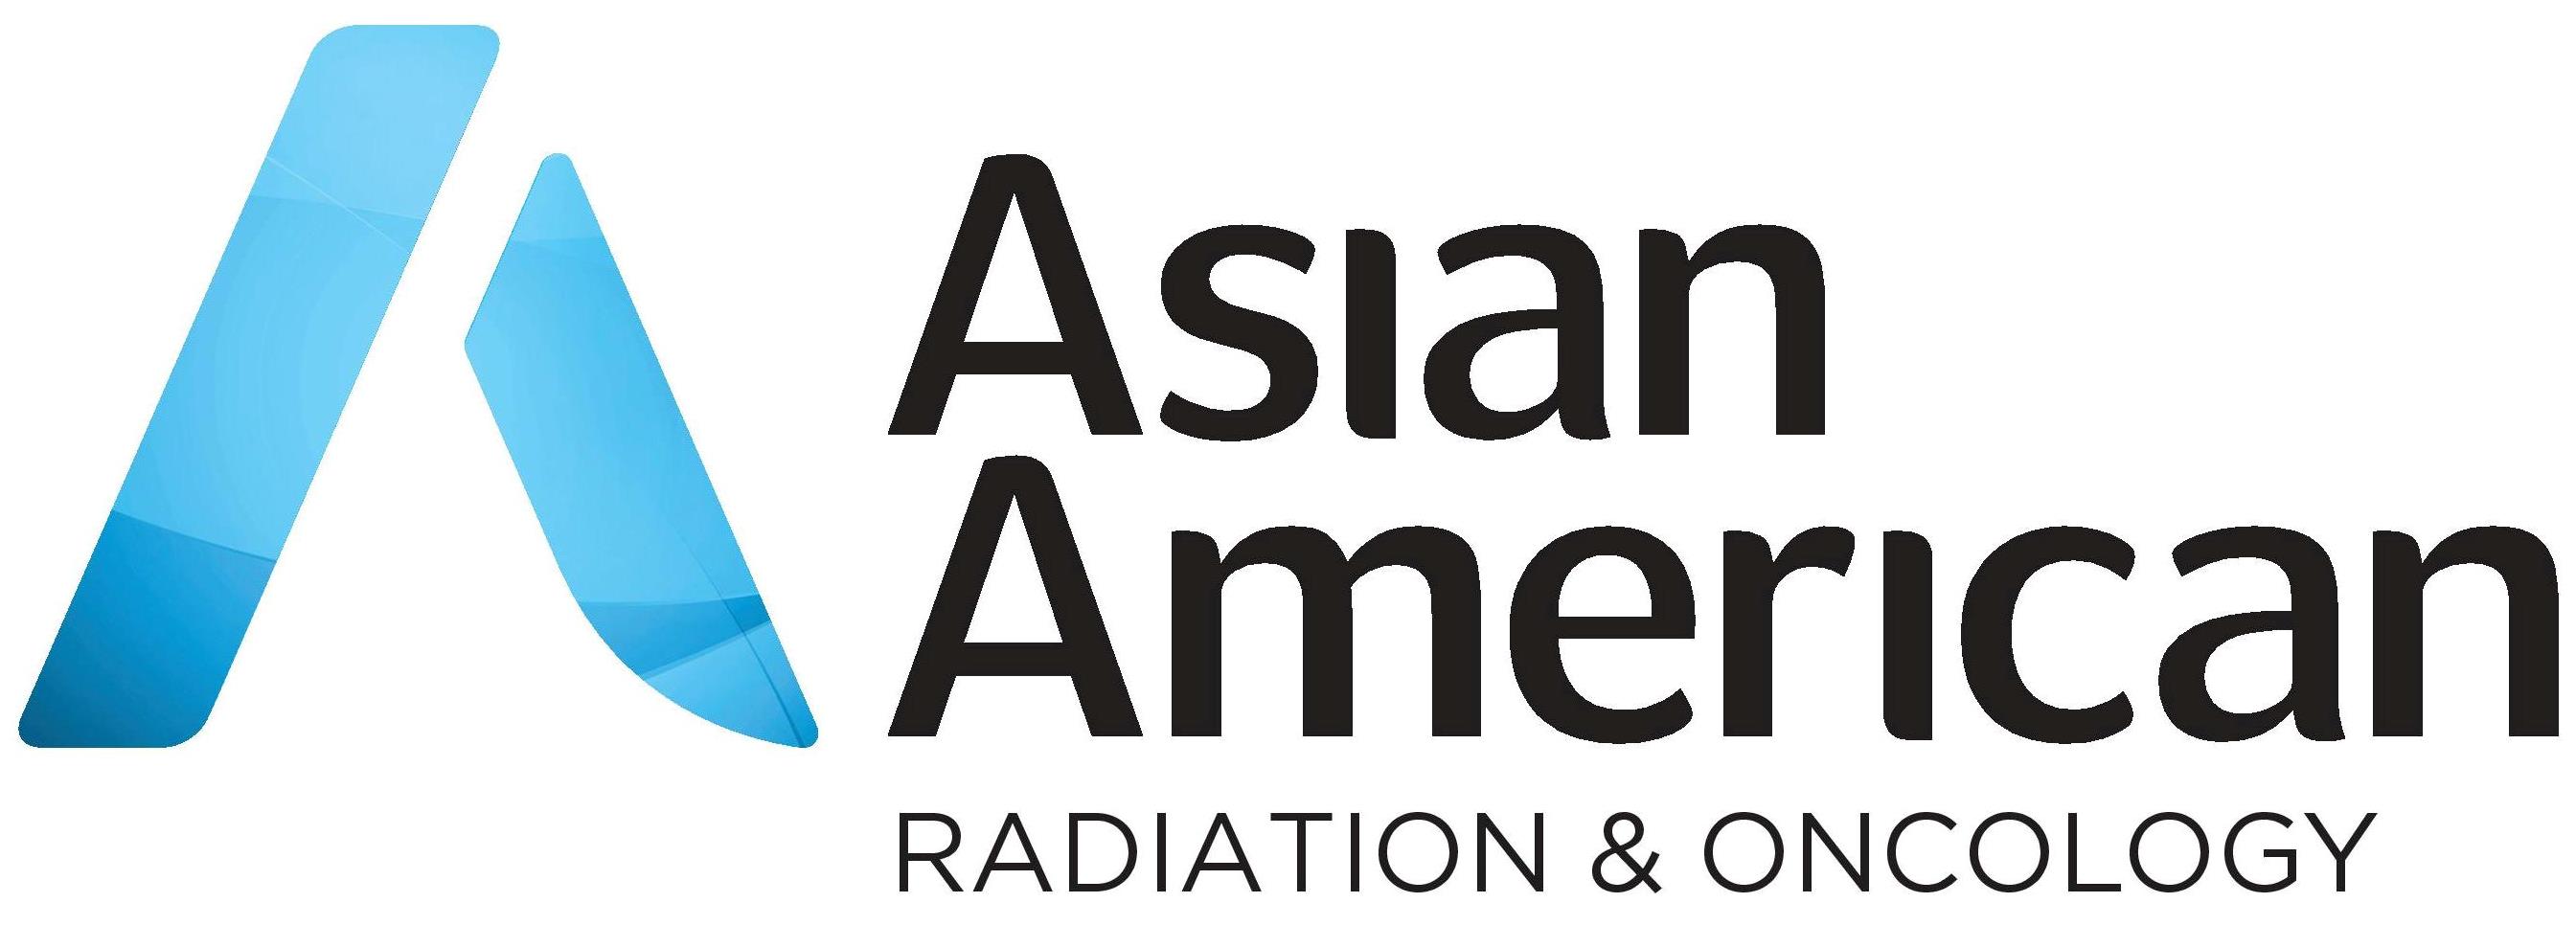 Asian American Radiation & Oncology